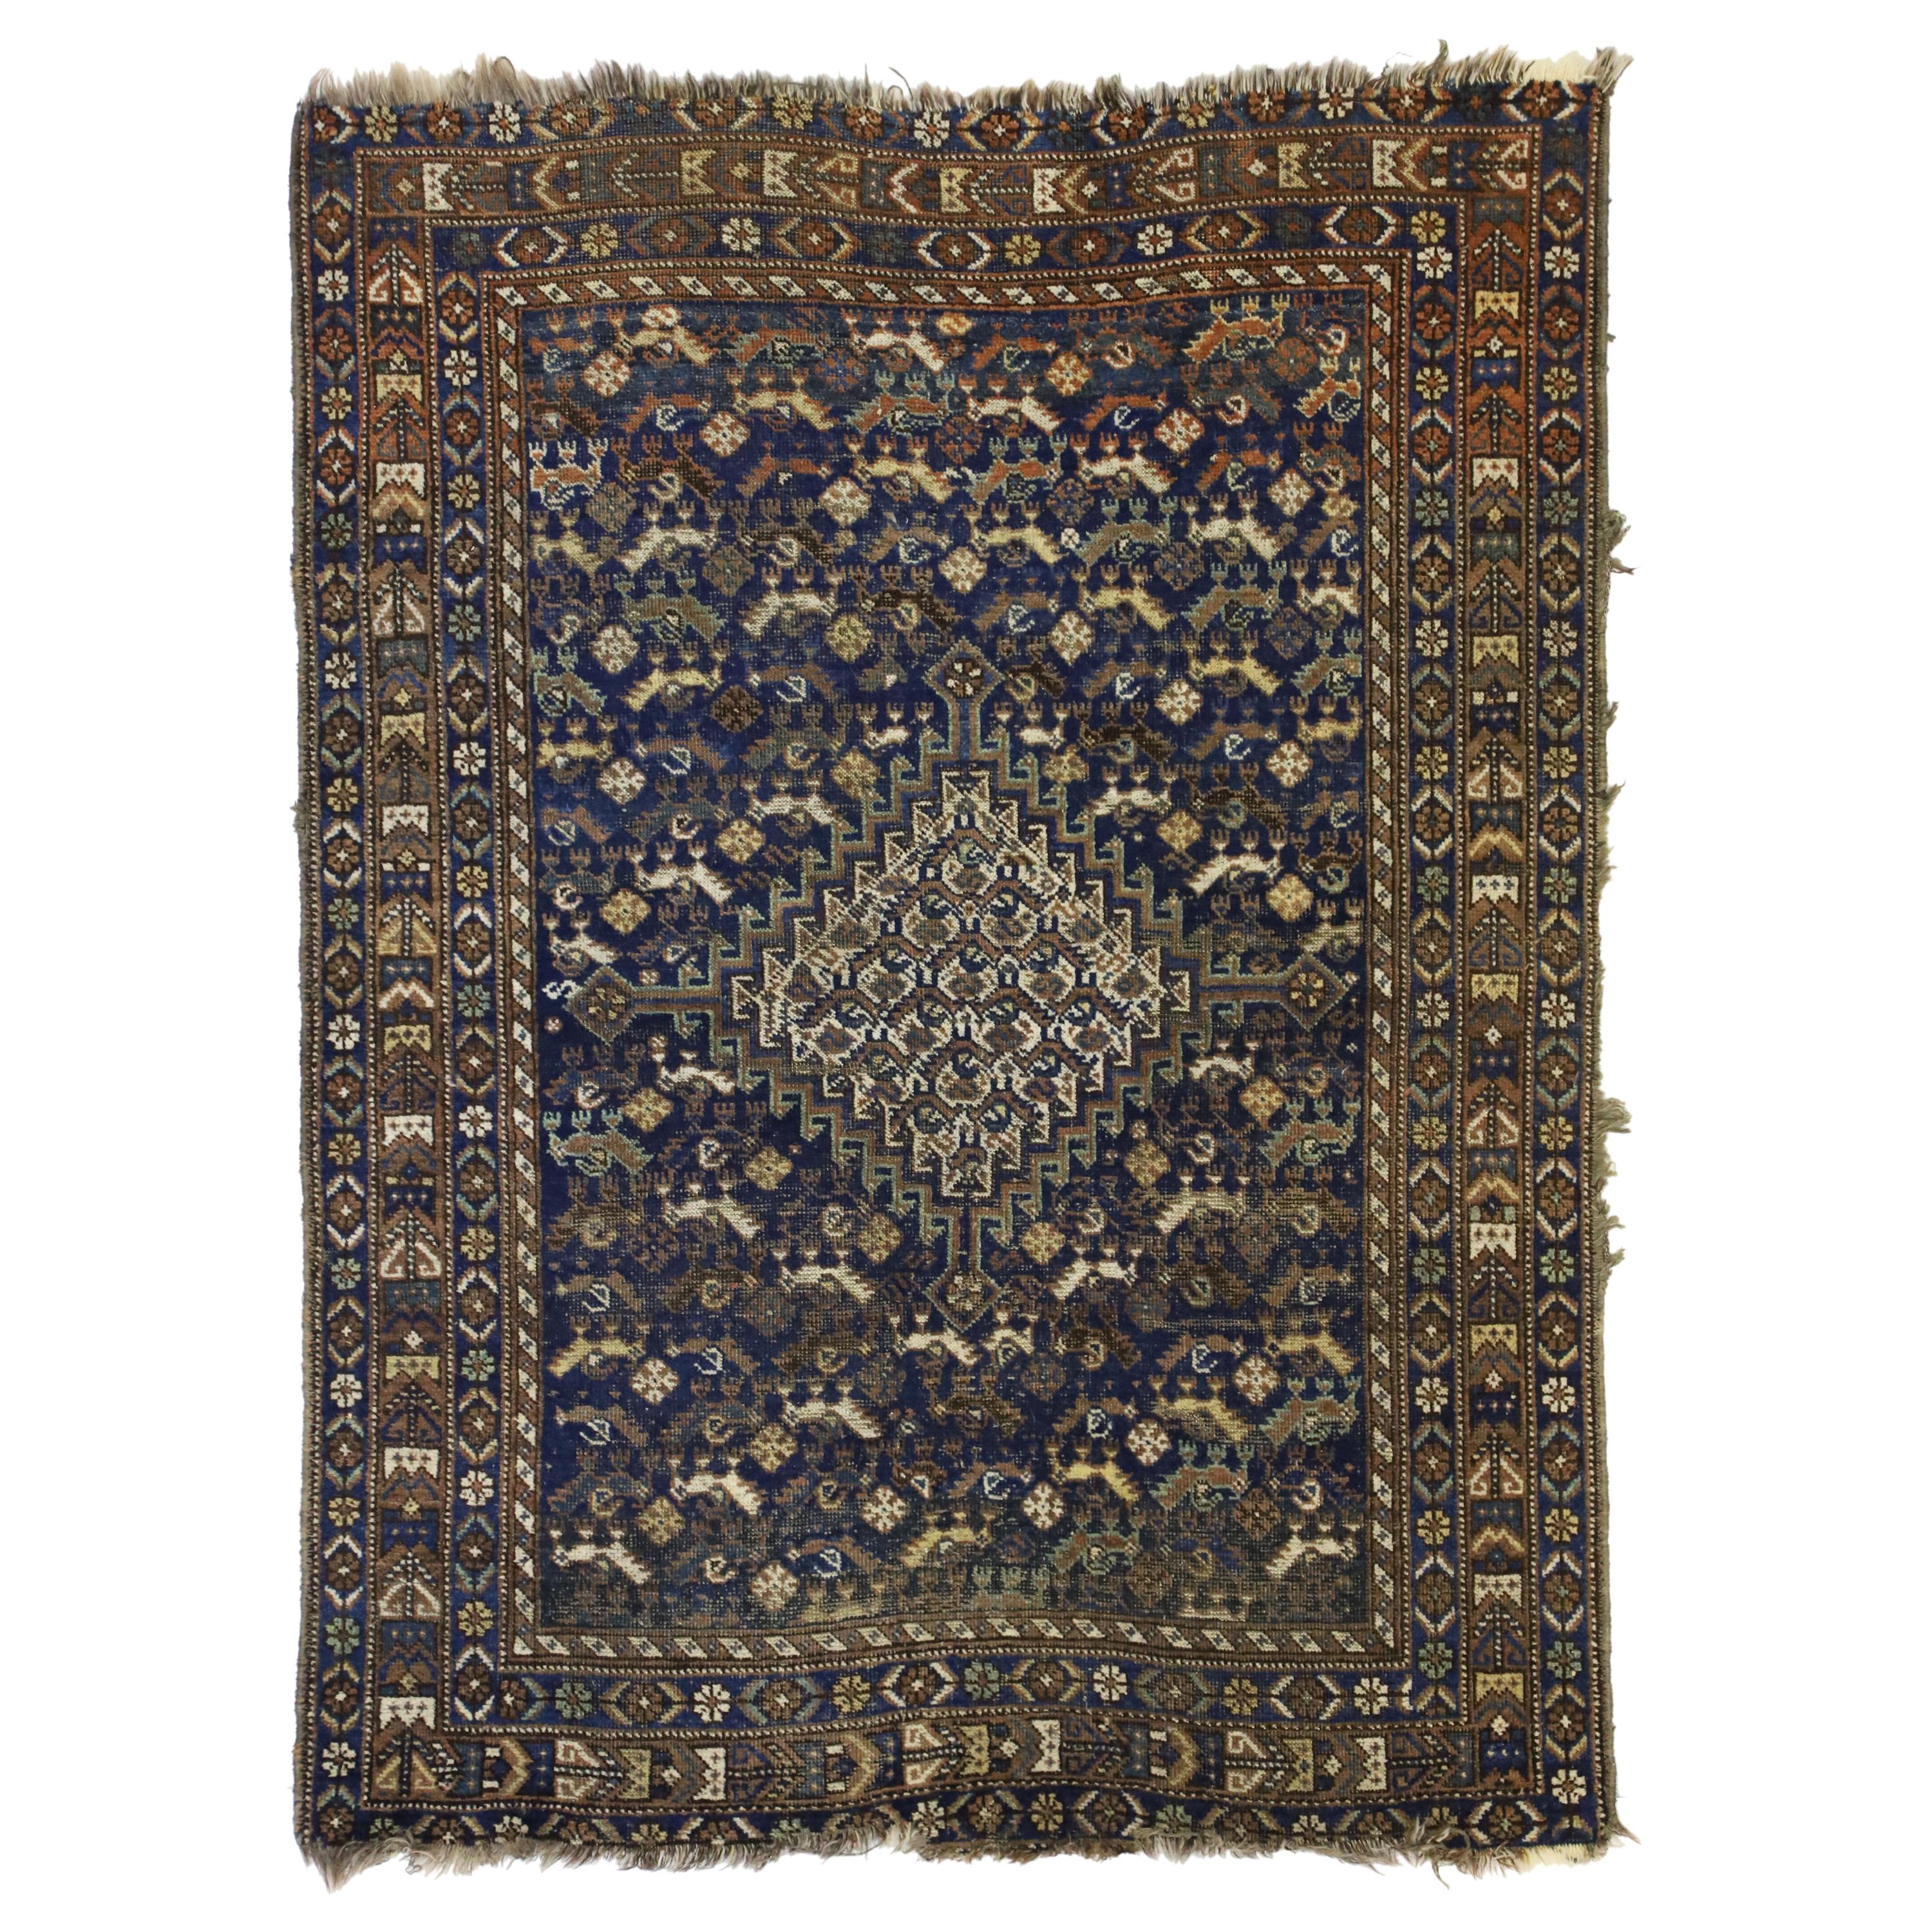 Worn-In Distressed Antique Persian Shiraz Accent Rug with Adirondack Lodge Style